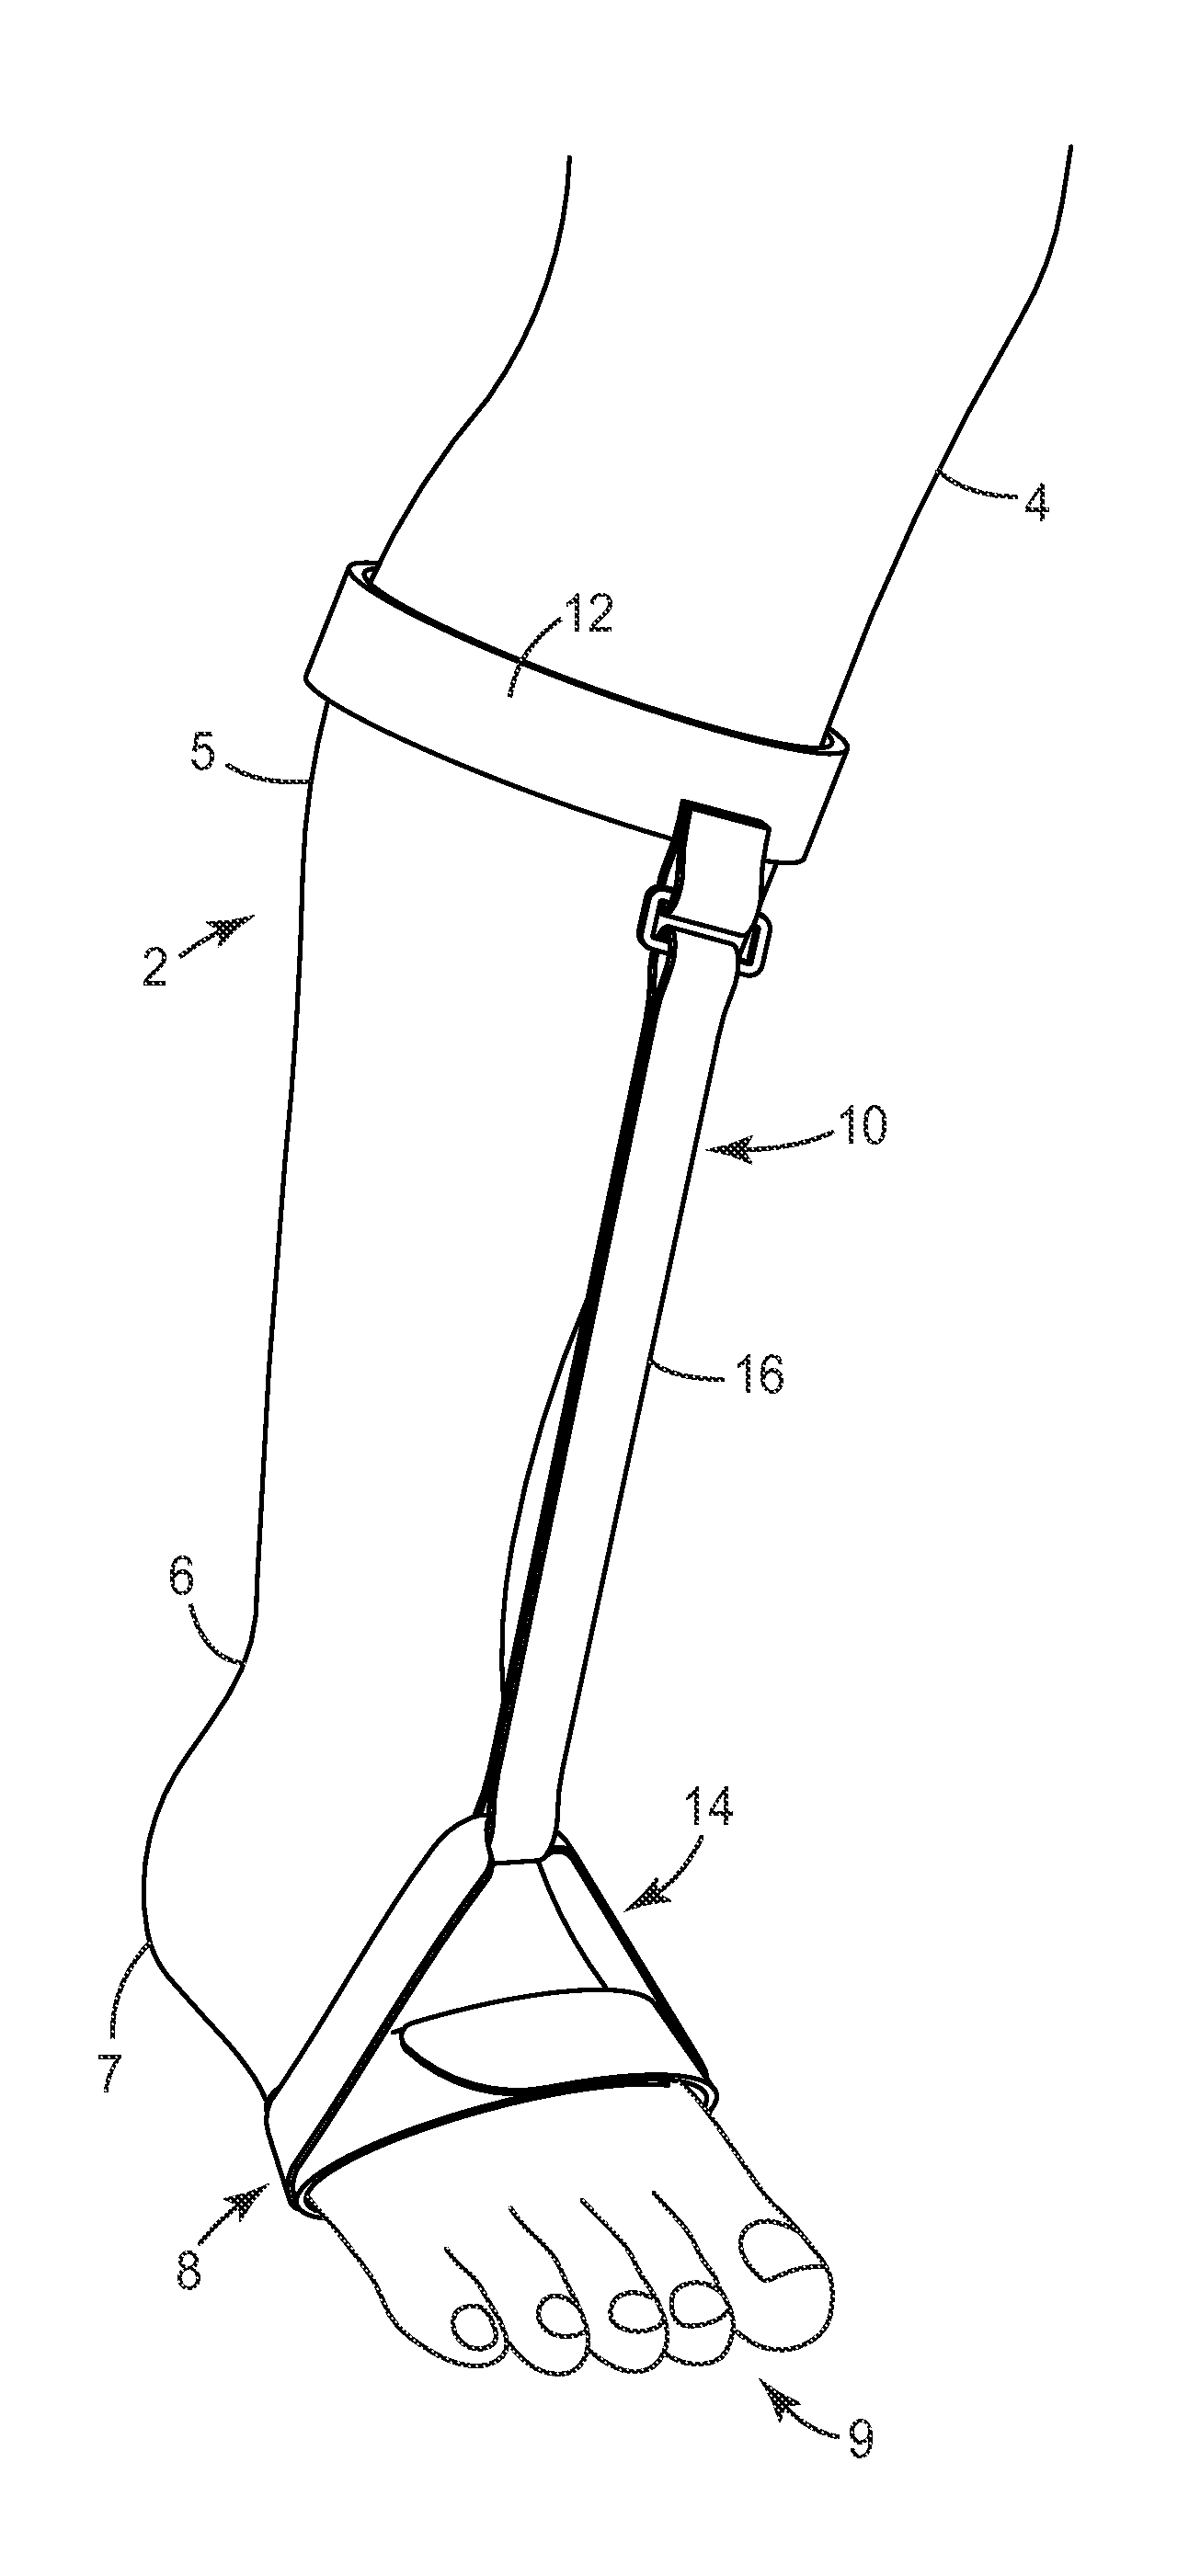 Foot support device